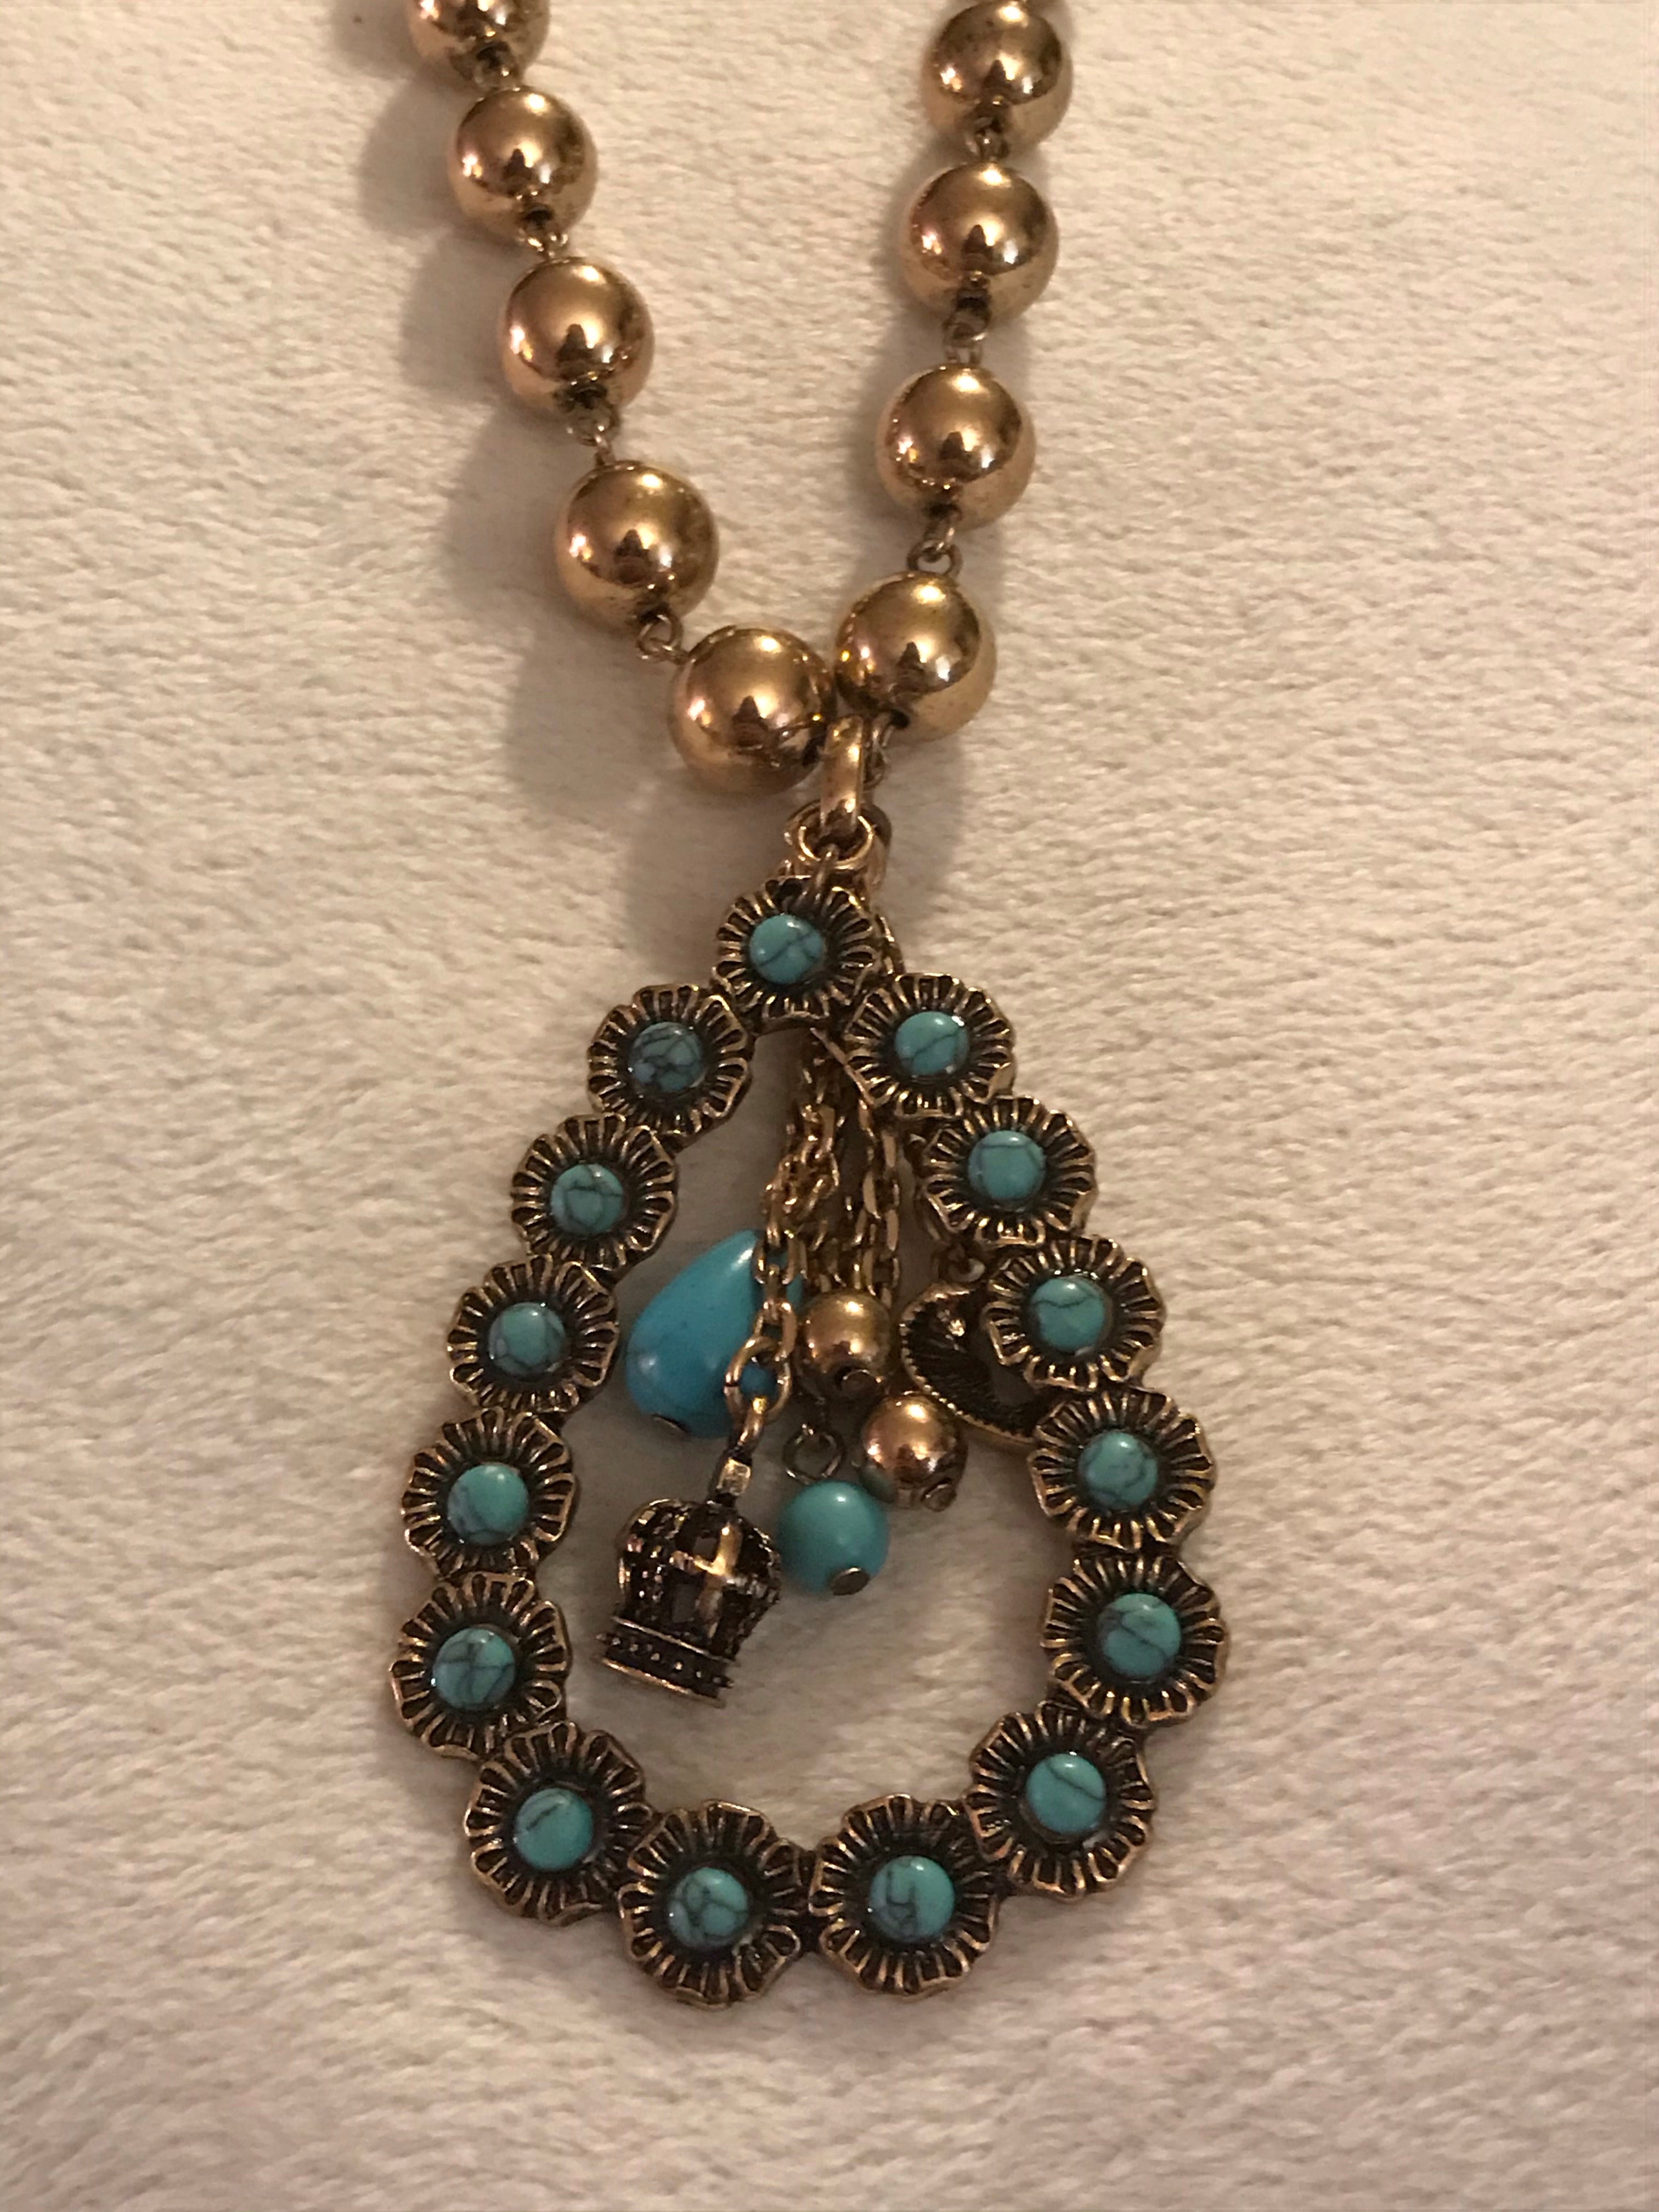 Gold Bead Necklace with Turquoise Open Teardrop Pendant